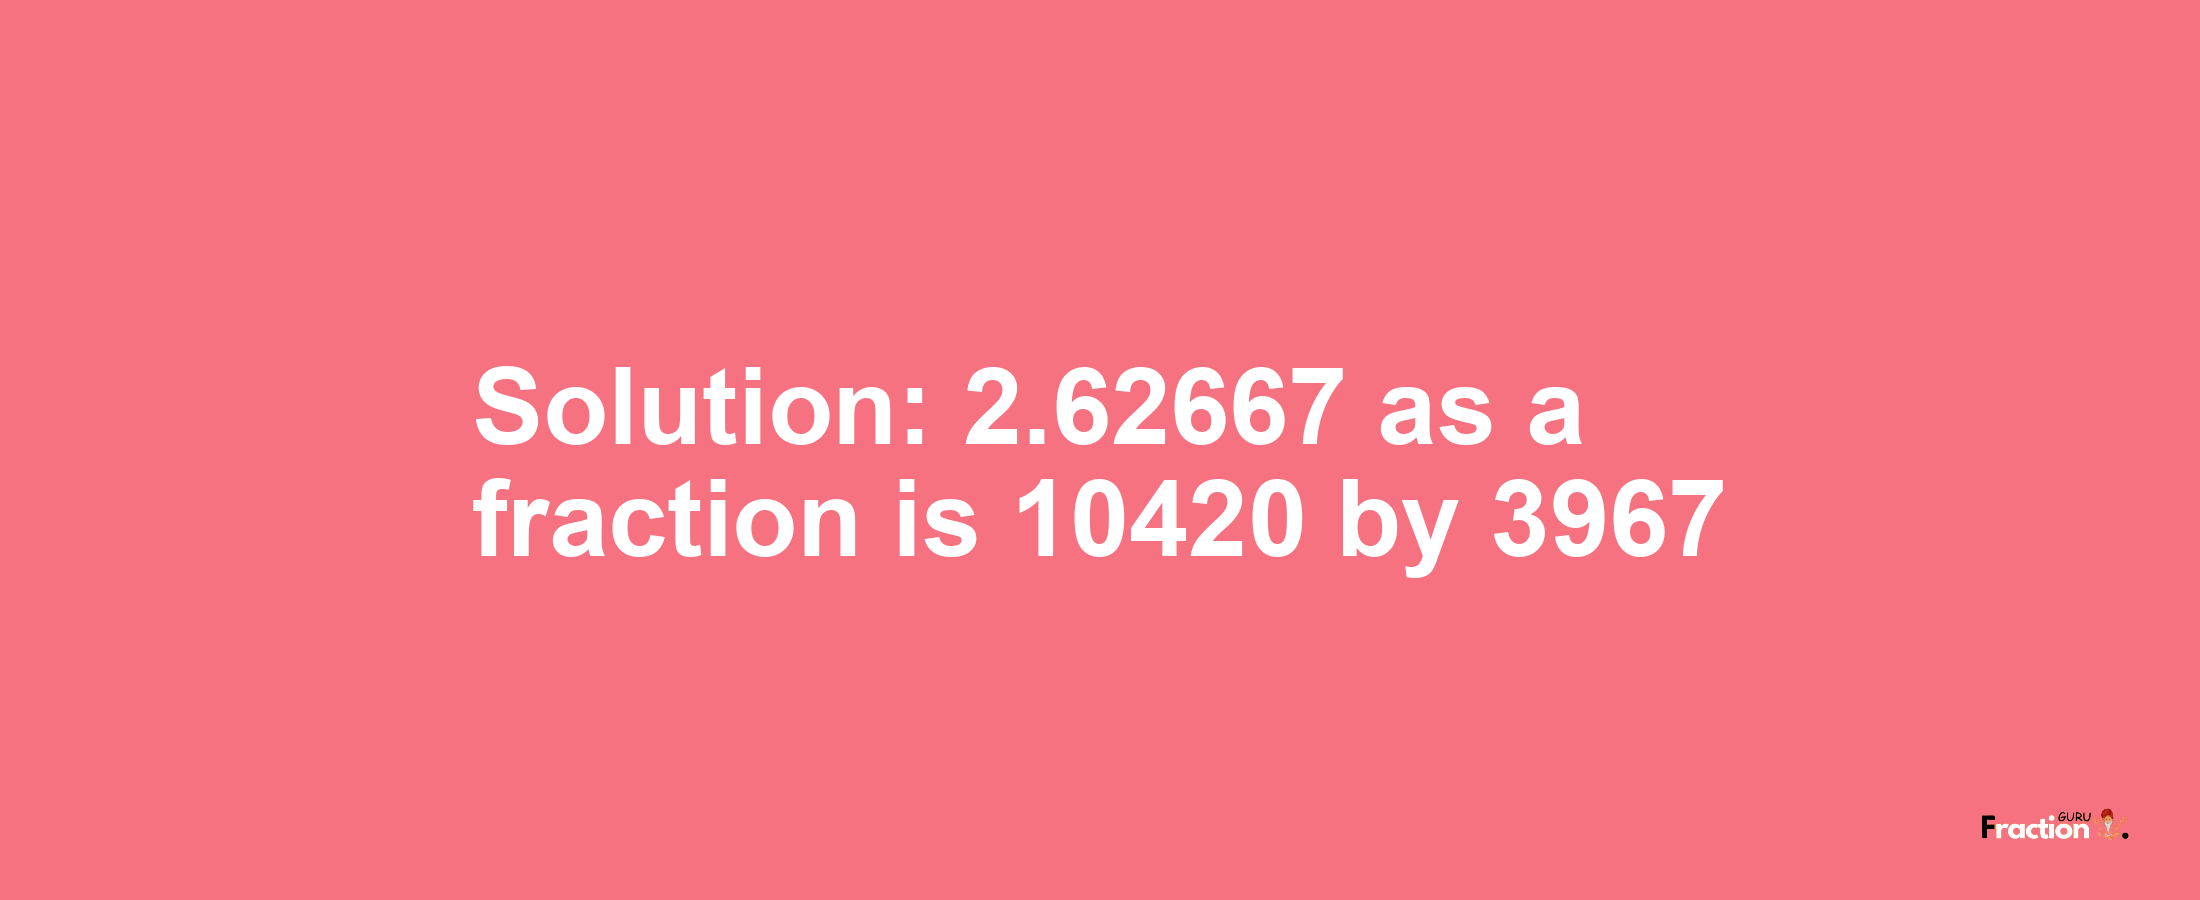 Solution:2.62667 as a fraction is 10420/3967